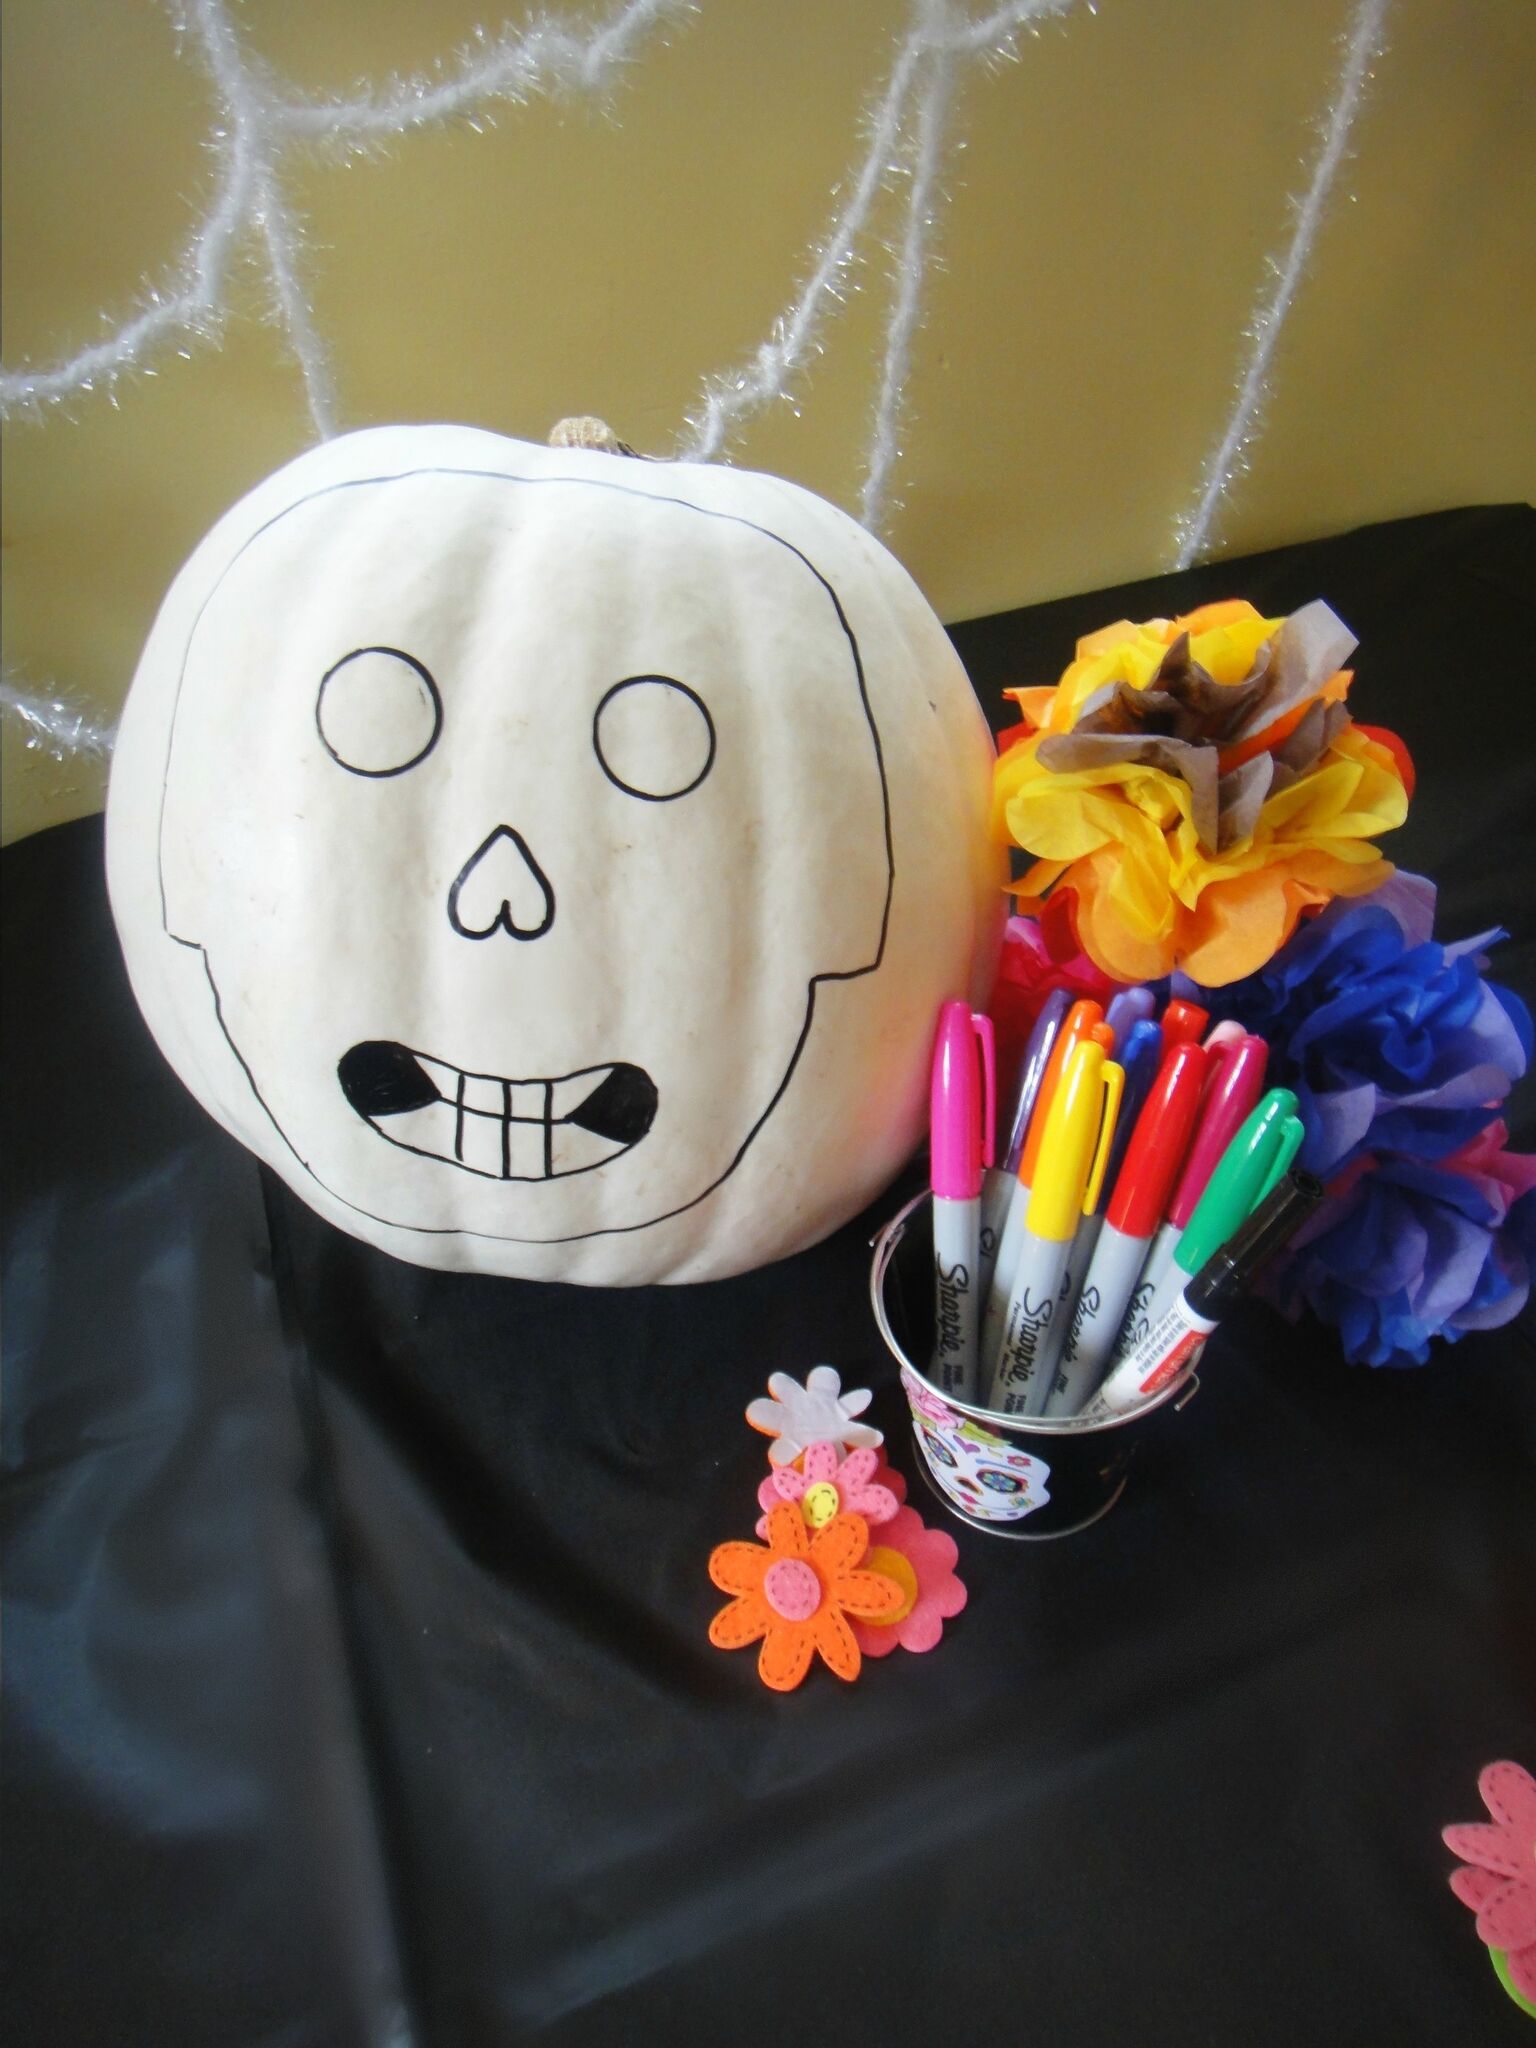 CELEBRATING DAY OF THE DEAD WITH PUMPKIN CRAFT